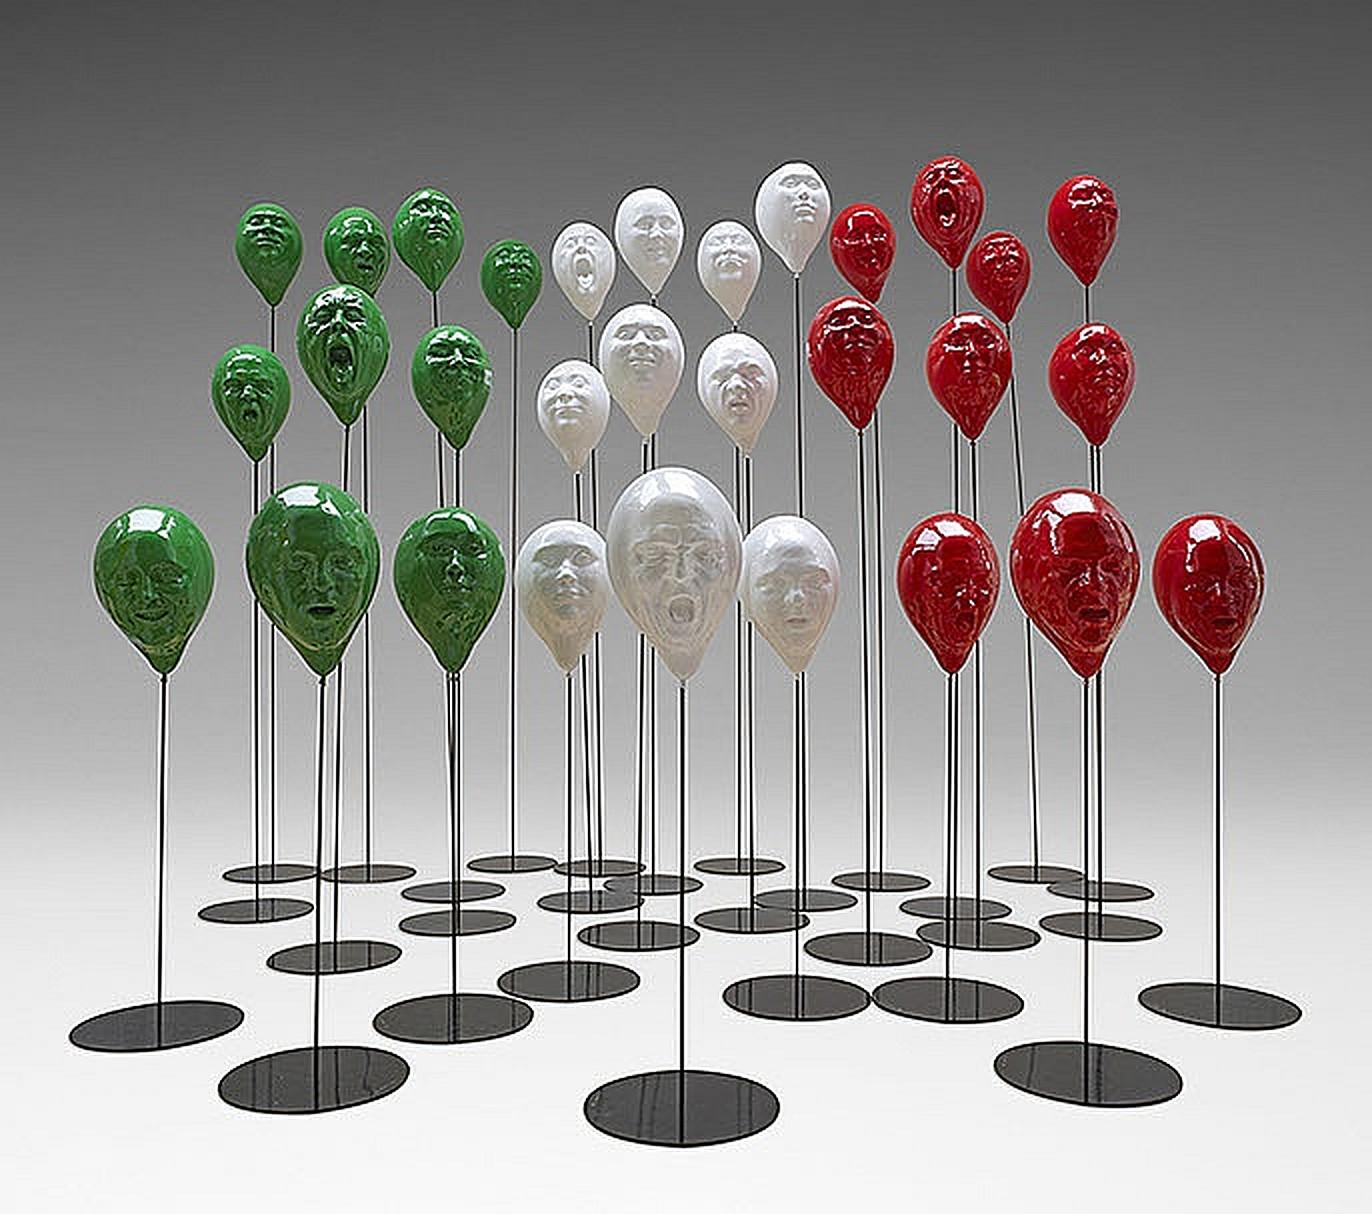 Mauro Corda Figurative Sculpture - Ballons Red, White and Green